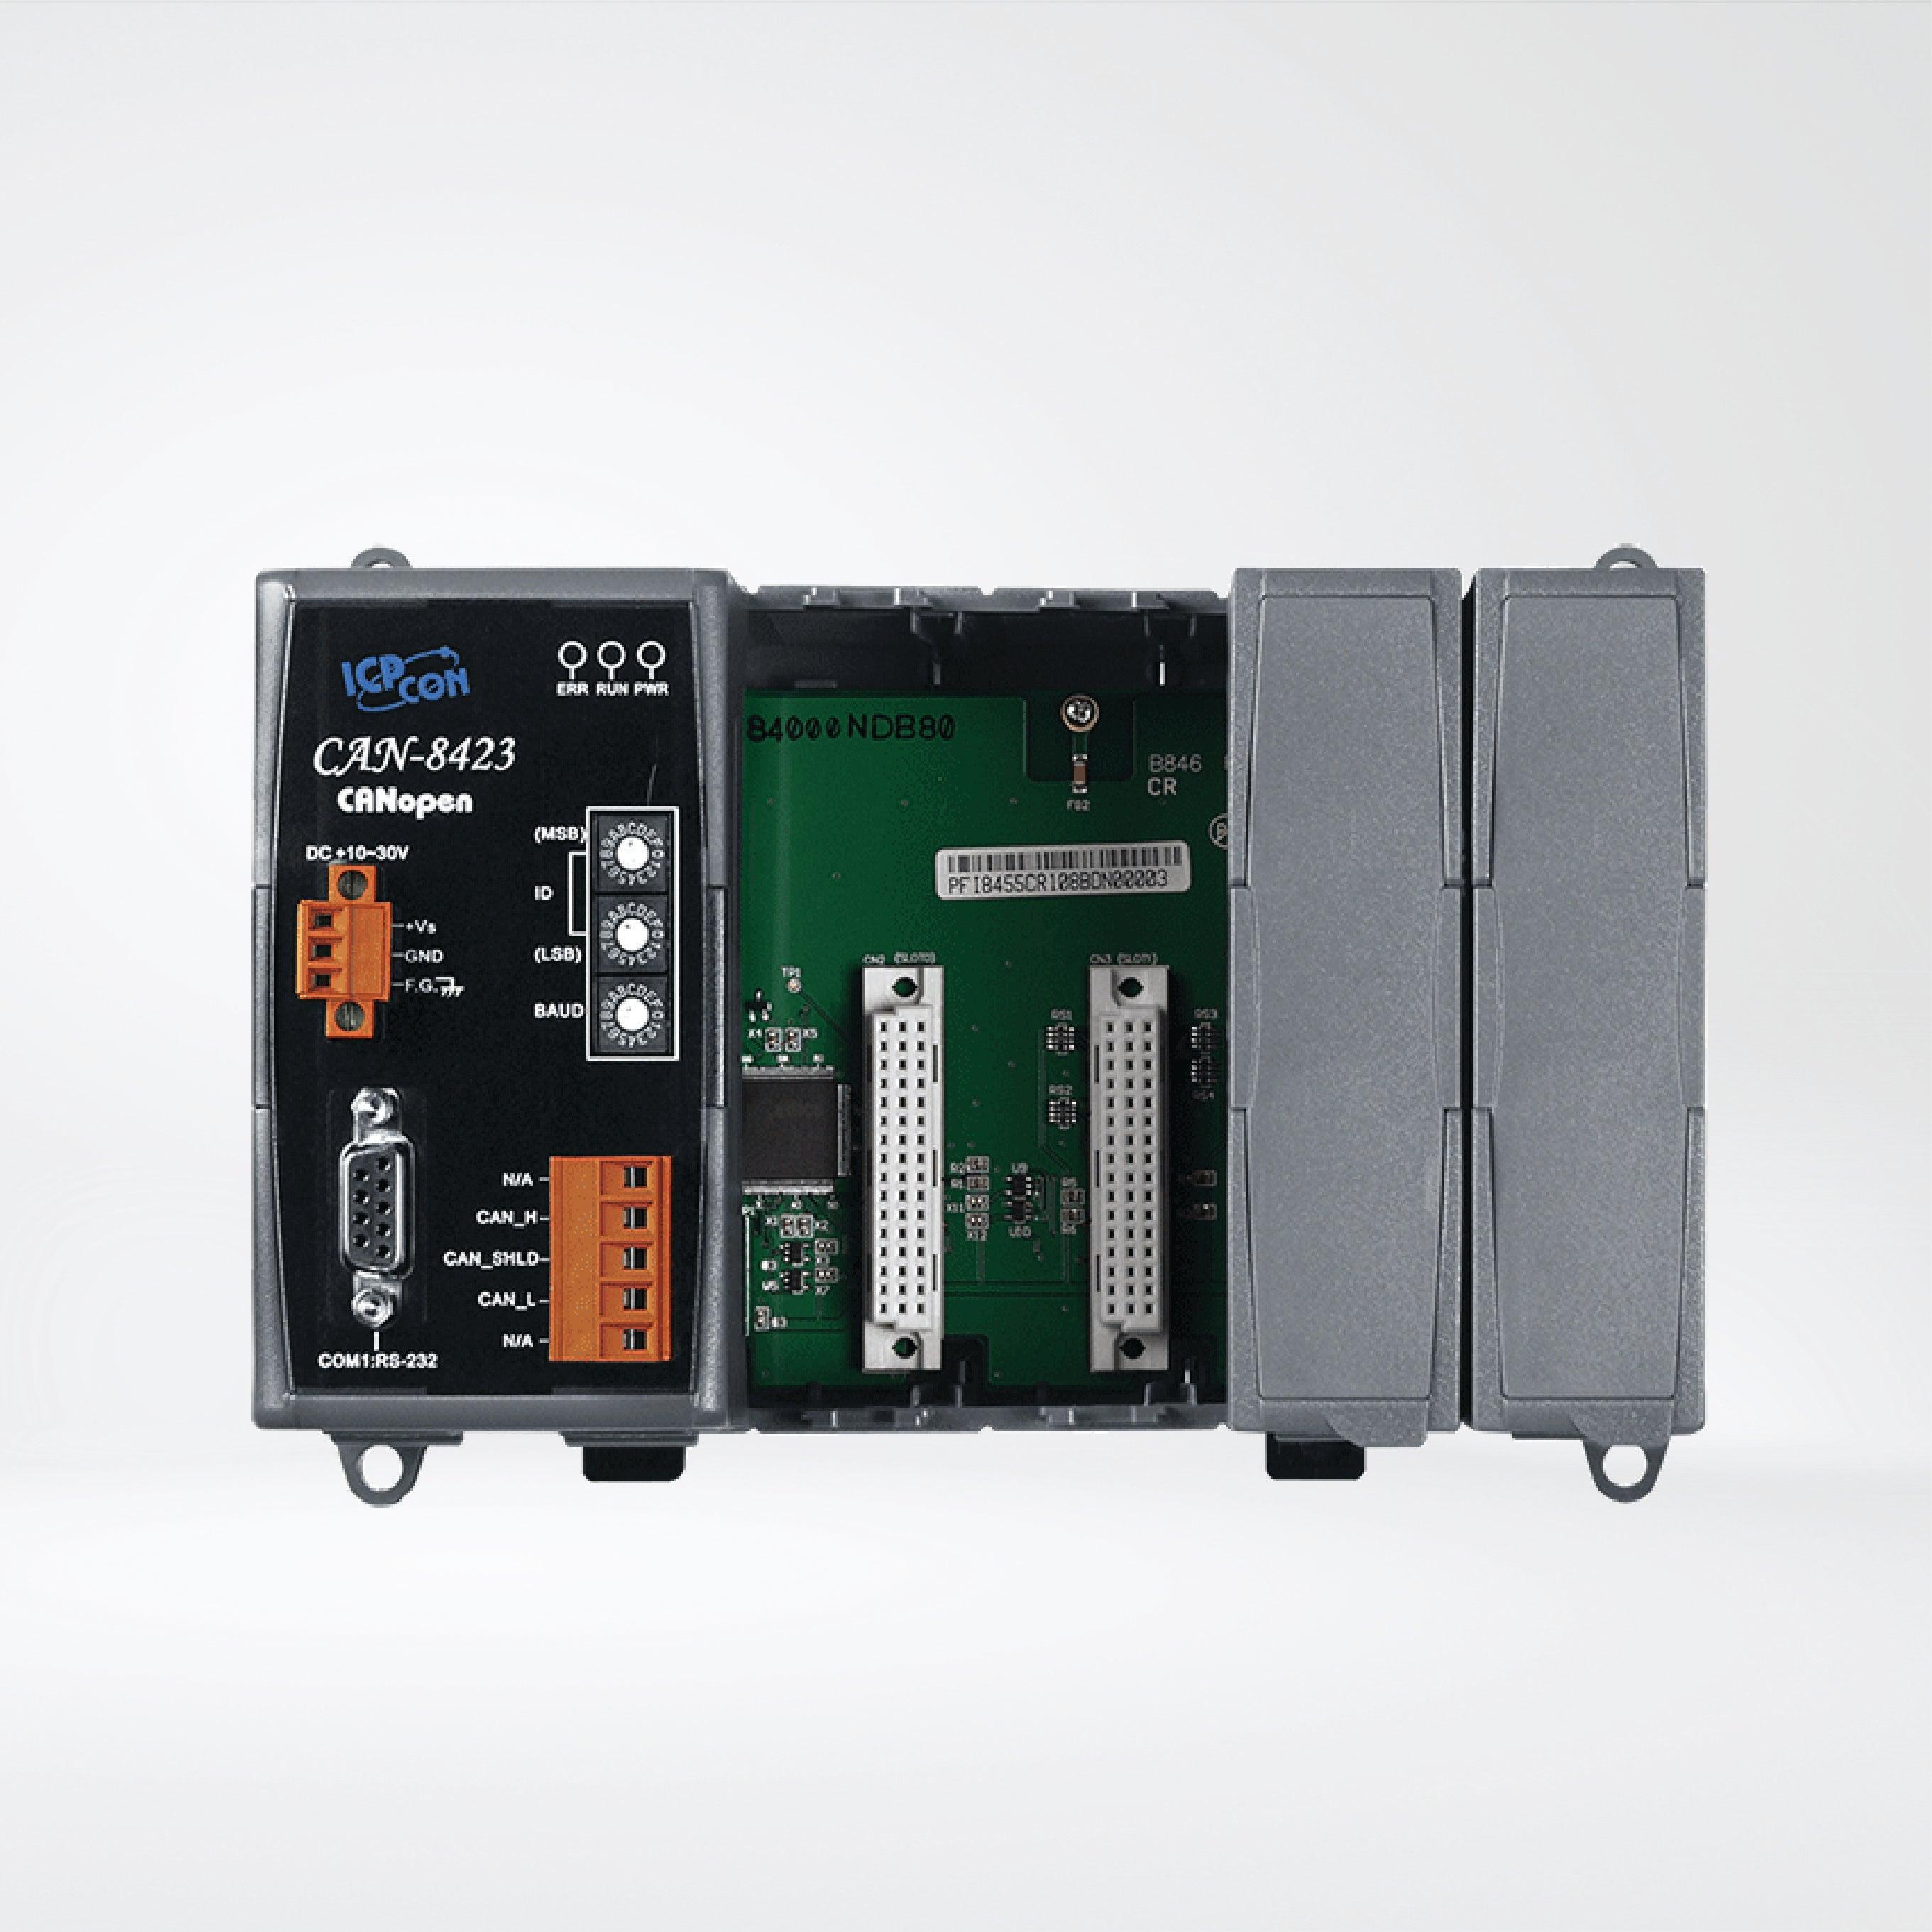 CAN-8423-G CANopen Remote I/O Unit with 4 I/O Slots - Riverplus